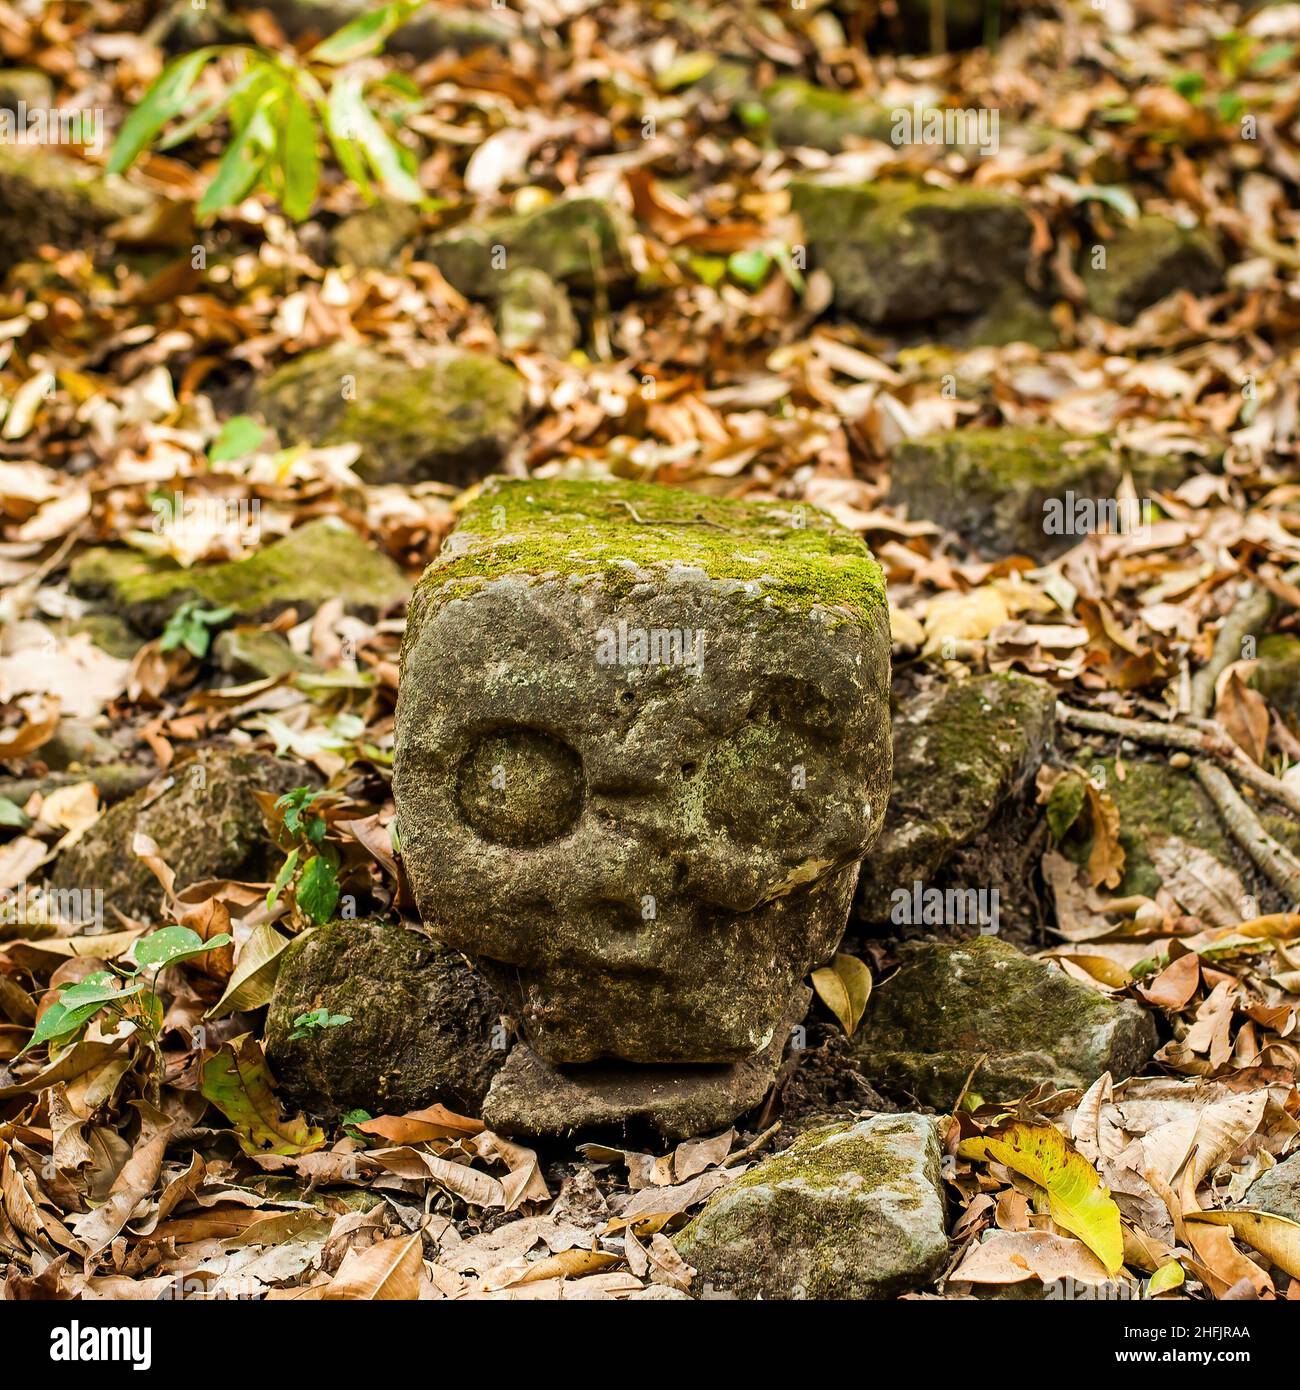 Albums 104+ Images copán is a mayan archaeological site located on the western border of Excellent